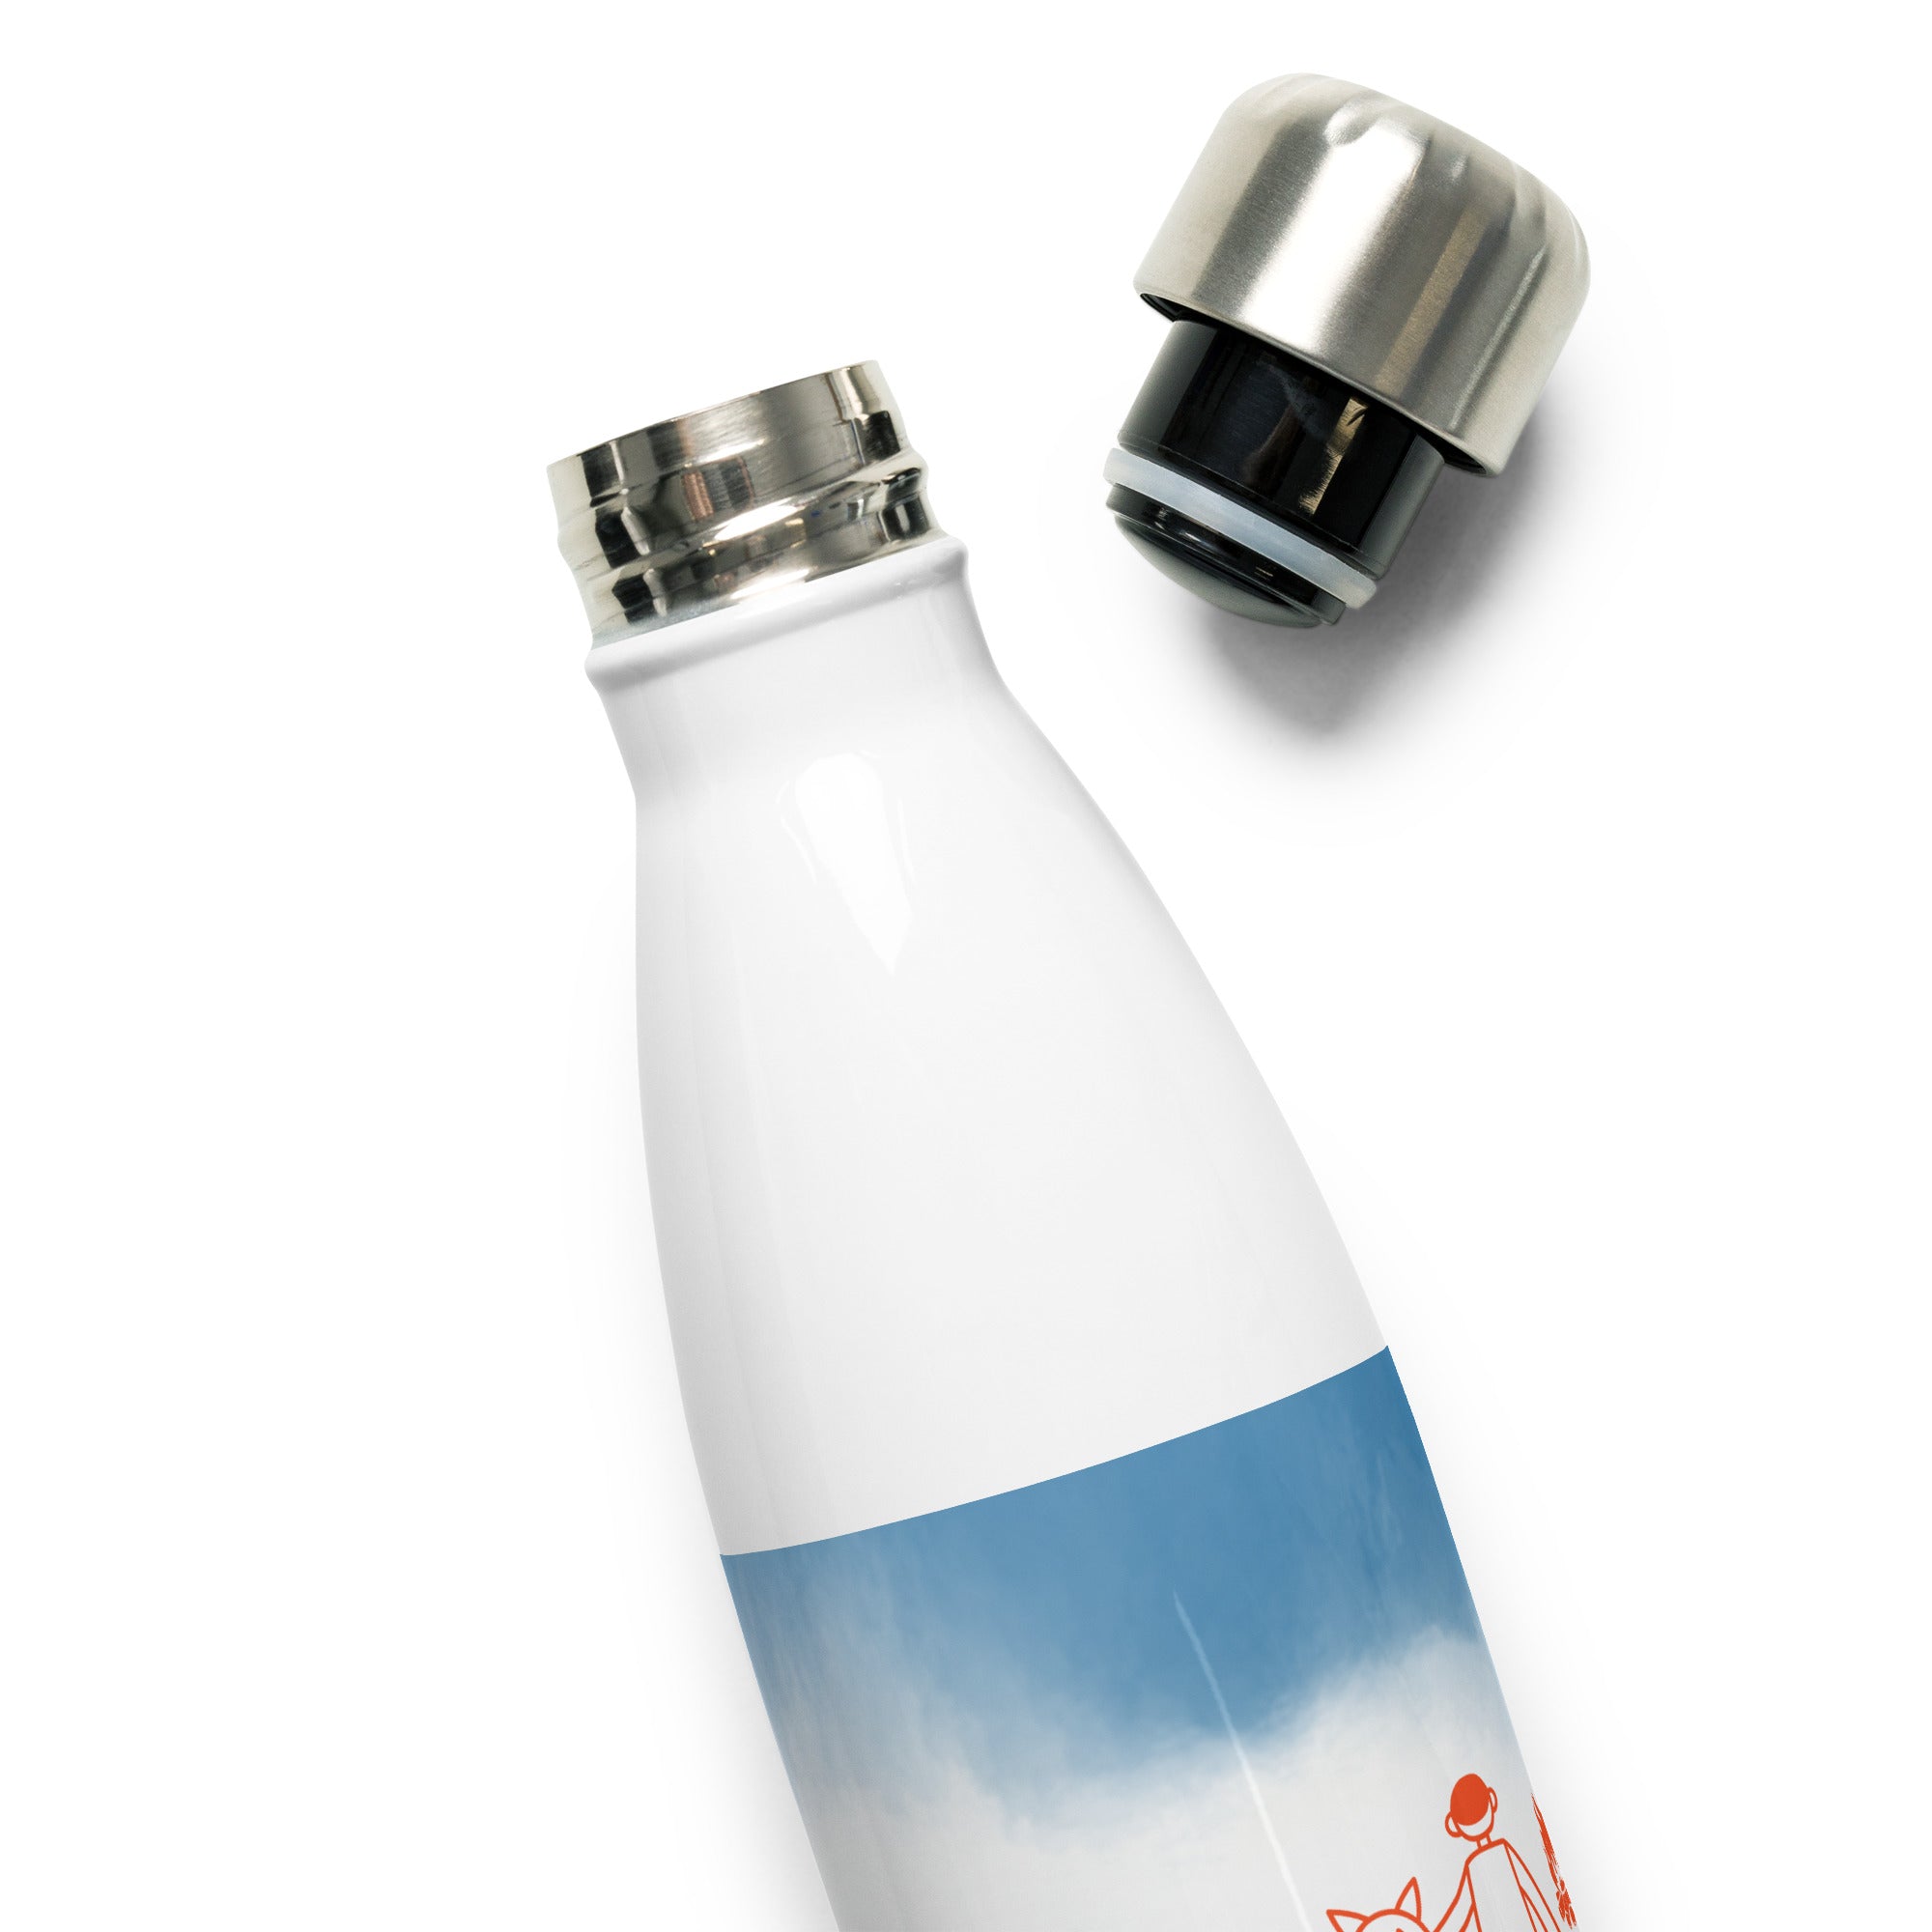 Bottle for Outdoorsy! Winter Camping theme!